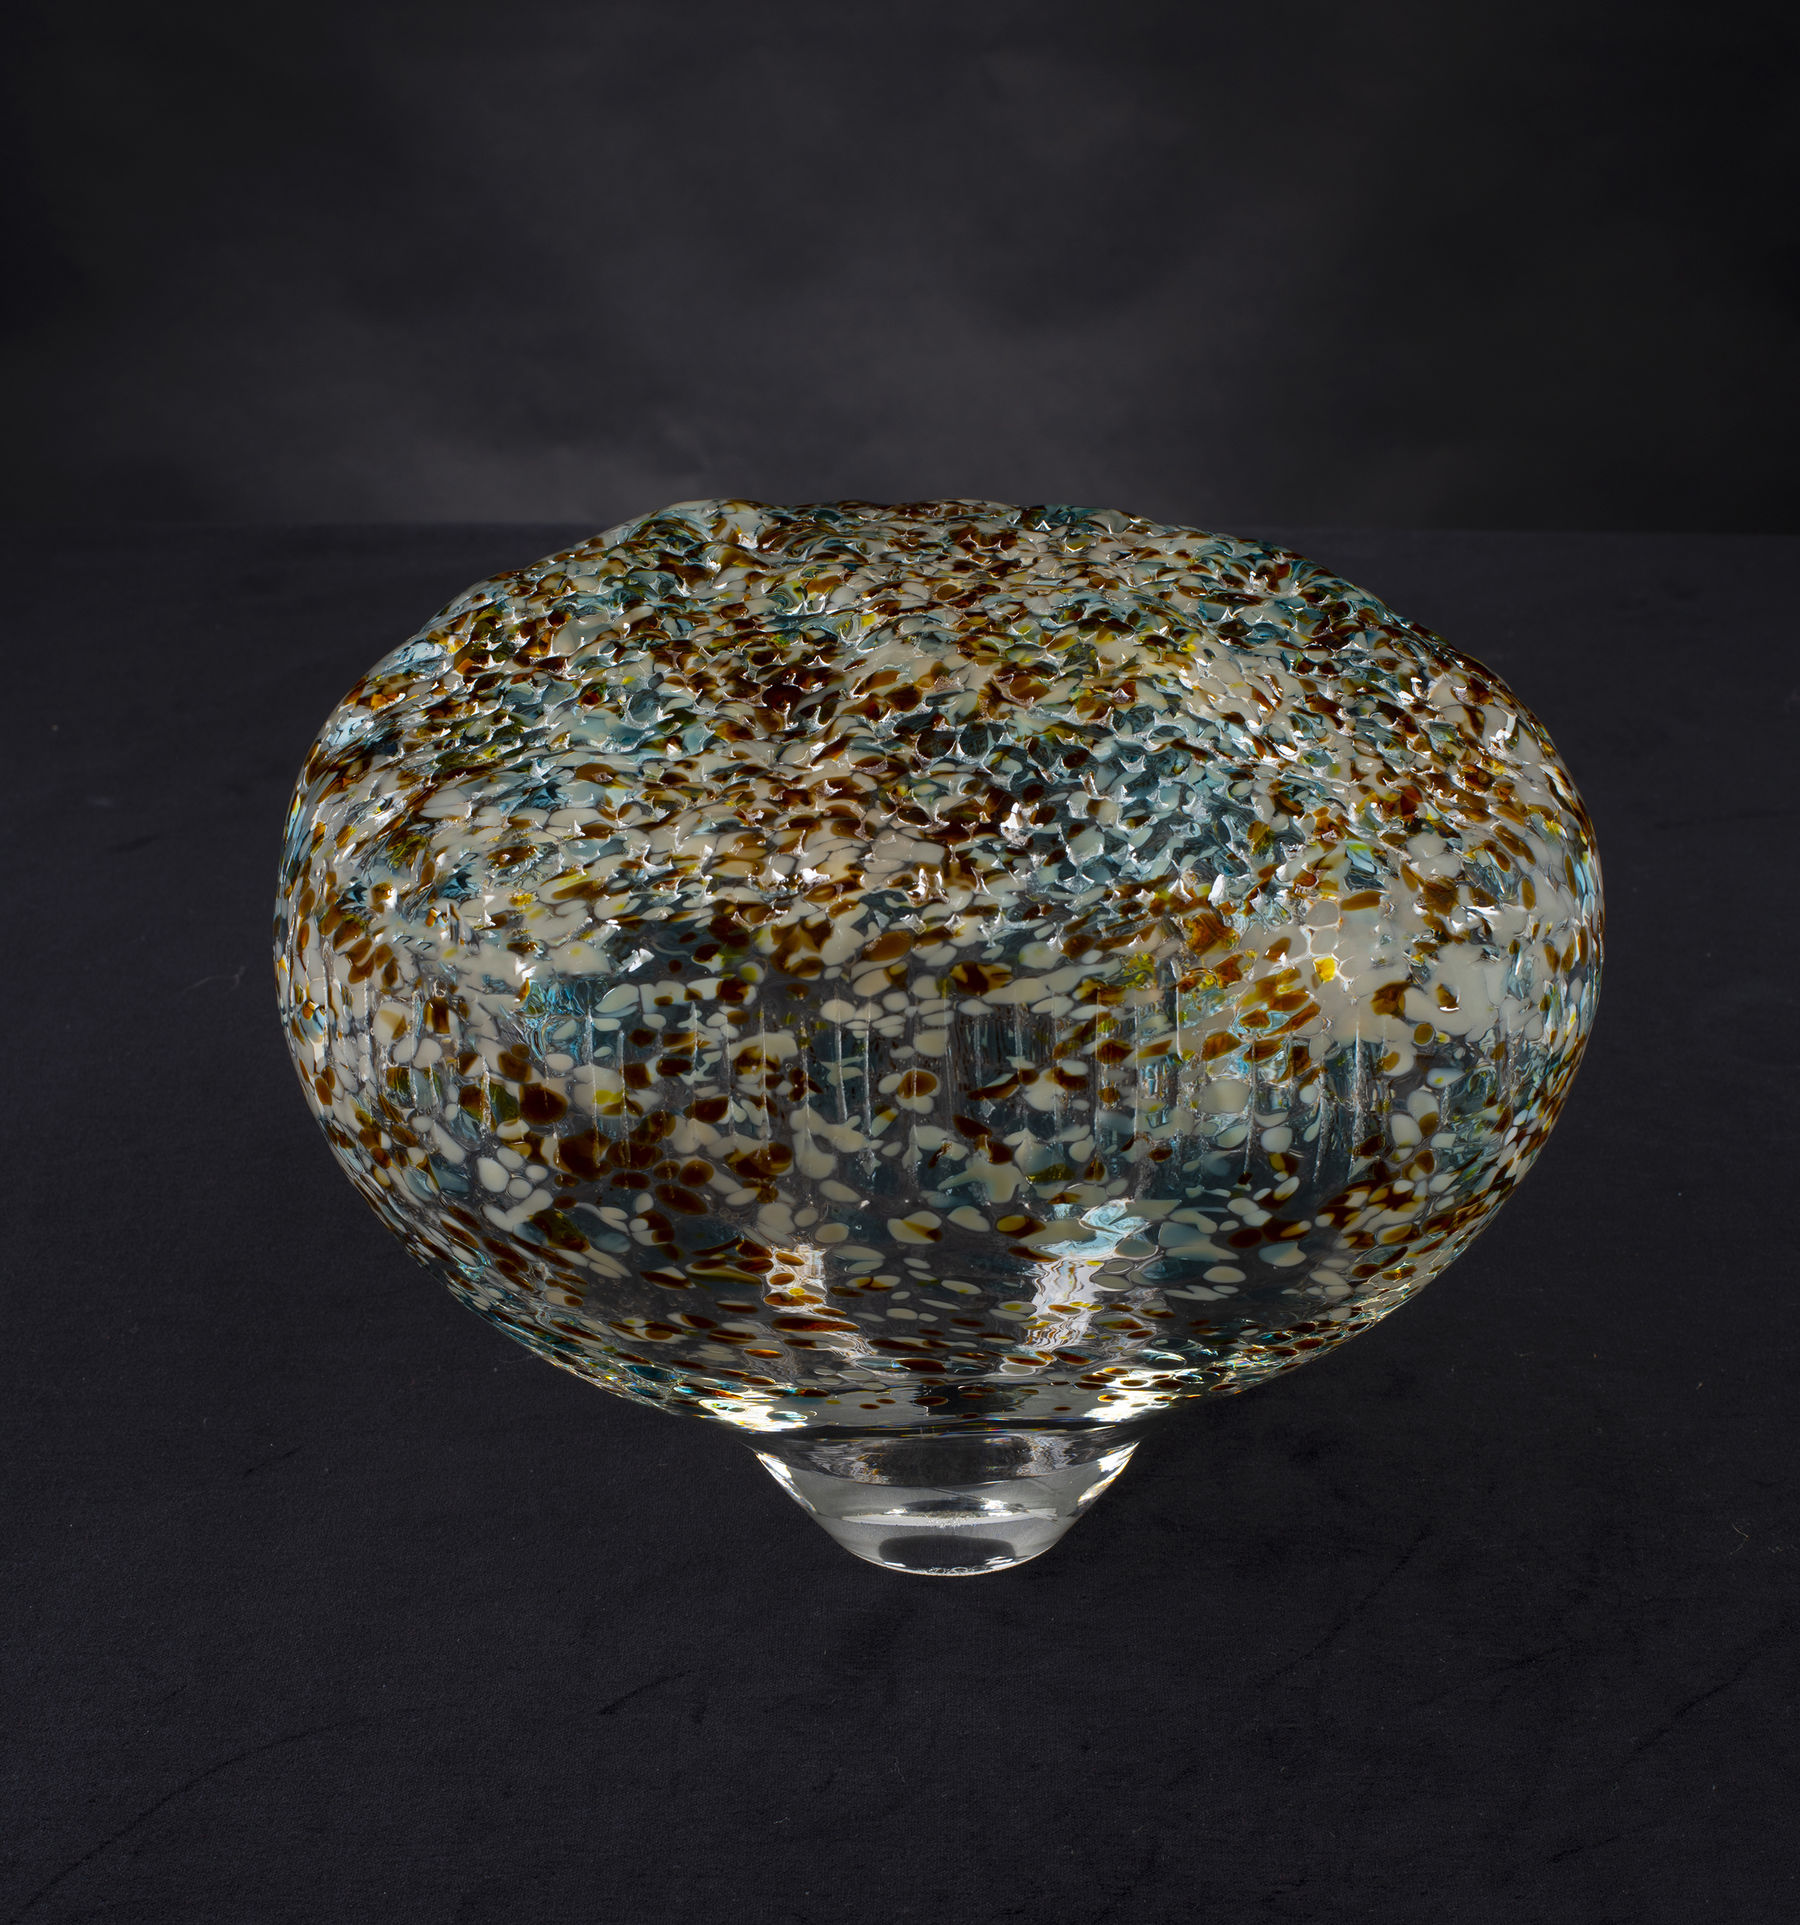 an organic shaped glass sculpture with colors